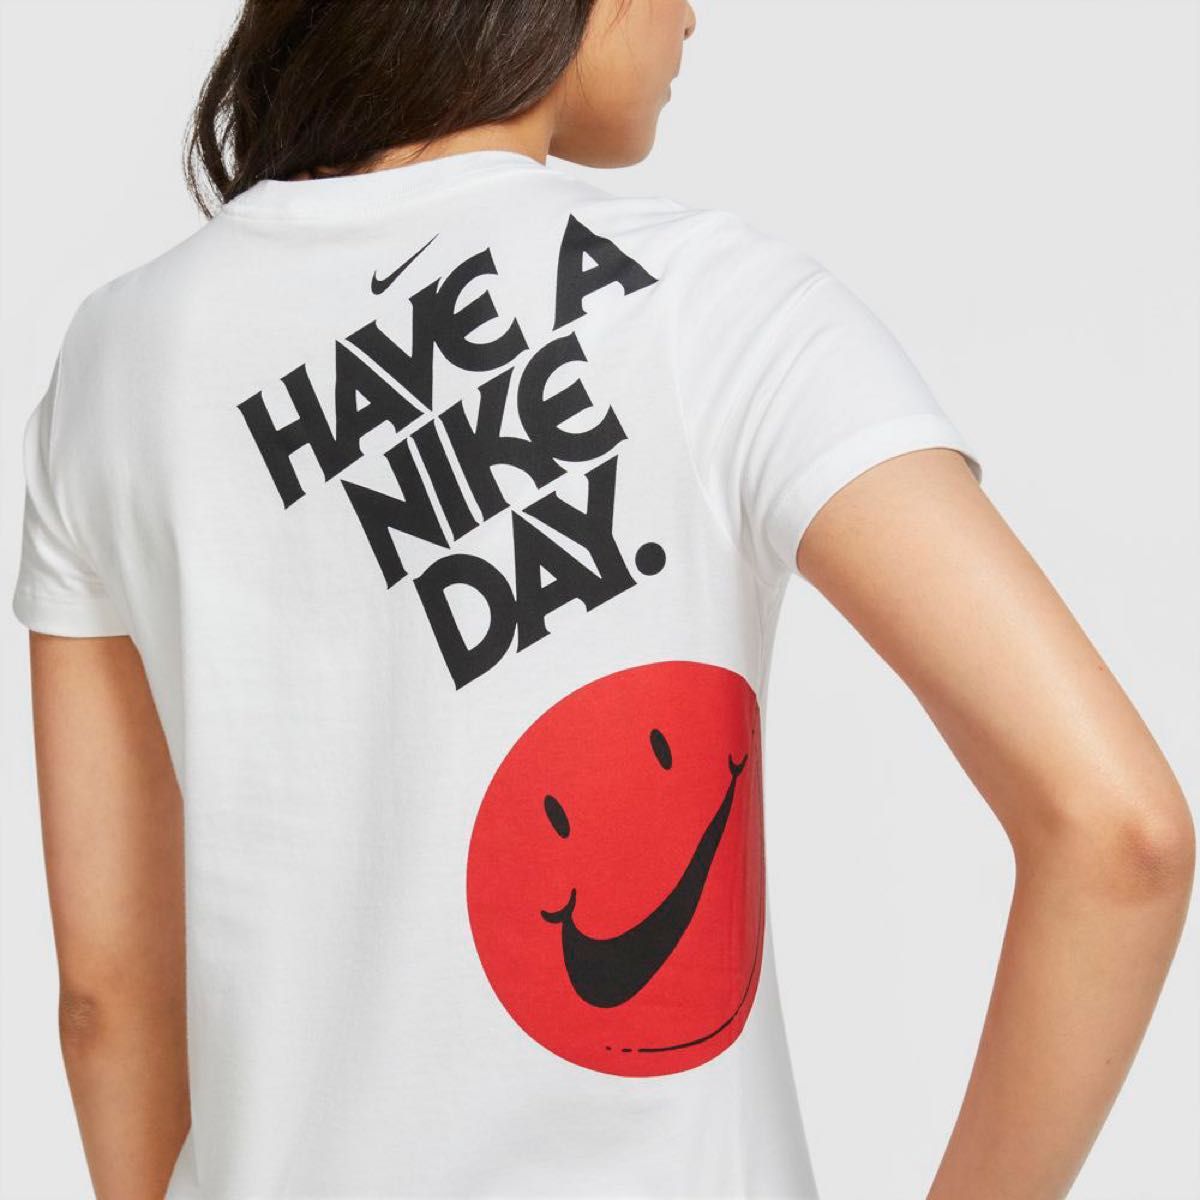 NIKE ナイキ　Tシャツ レディース 半袖 HAVE A NIKE DAY  M